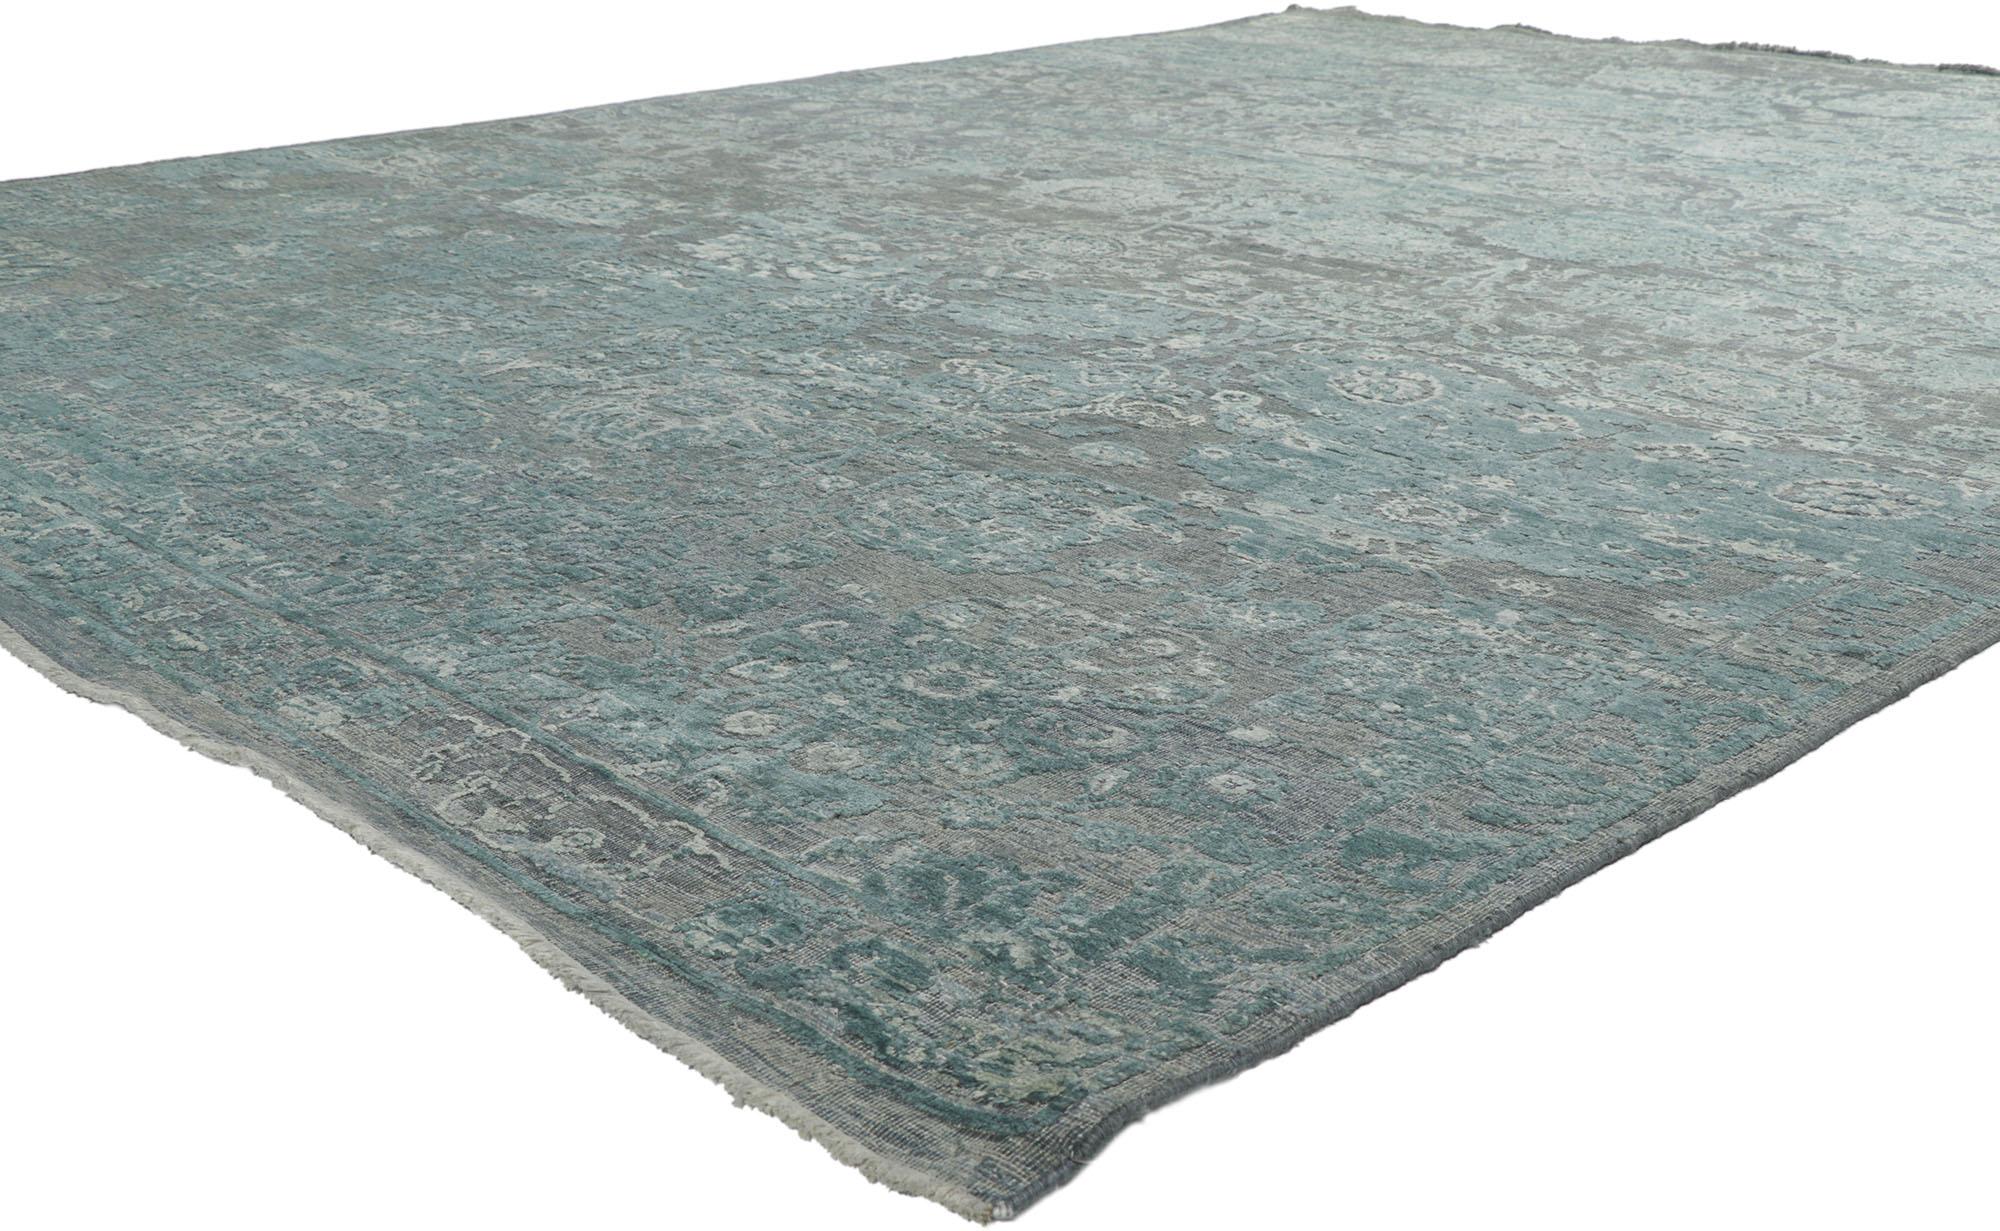 30709 New Contemporary Vintage Style Distressed High-Low rug 08'08 x 11'11. Showcasing a modern style and raised design with incredible detail and texture, this hand knotted wool contemporary textured rug is a captivating vision of woven beauty. The